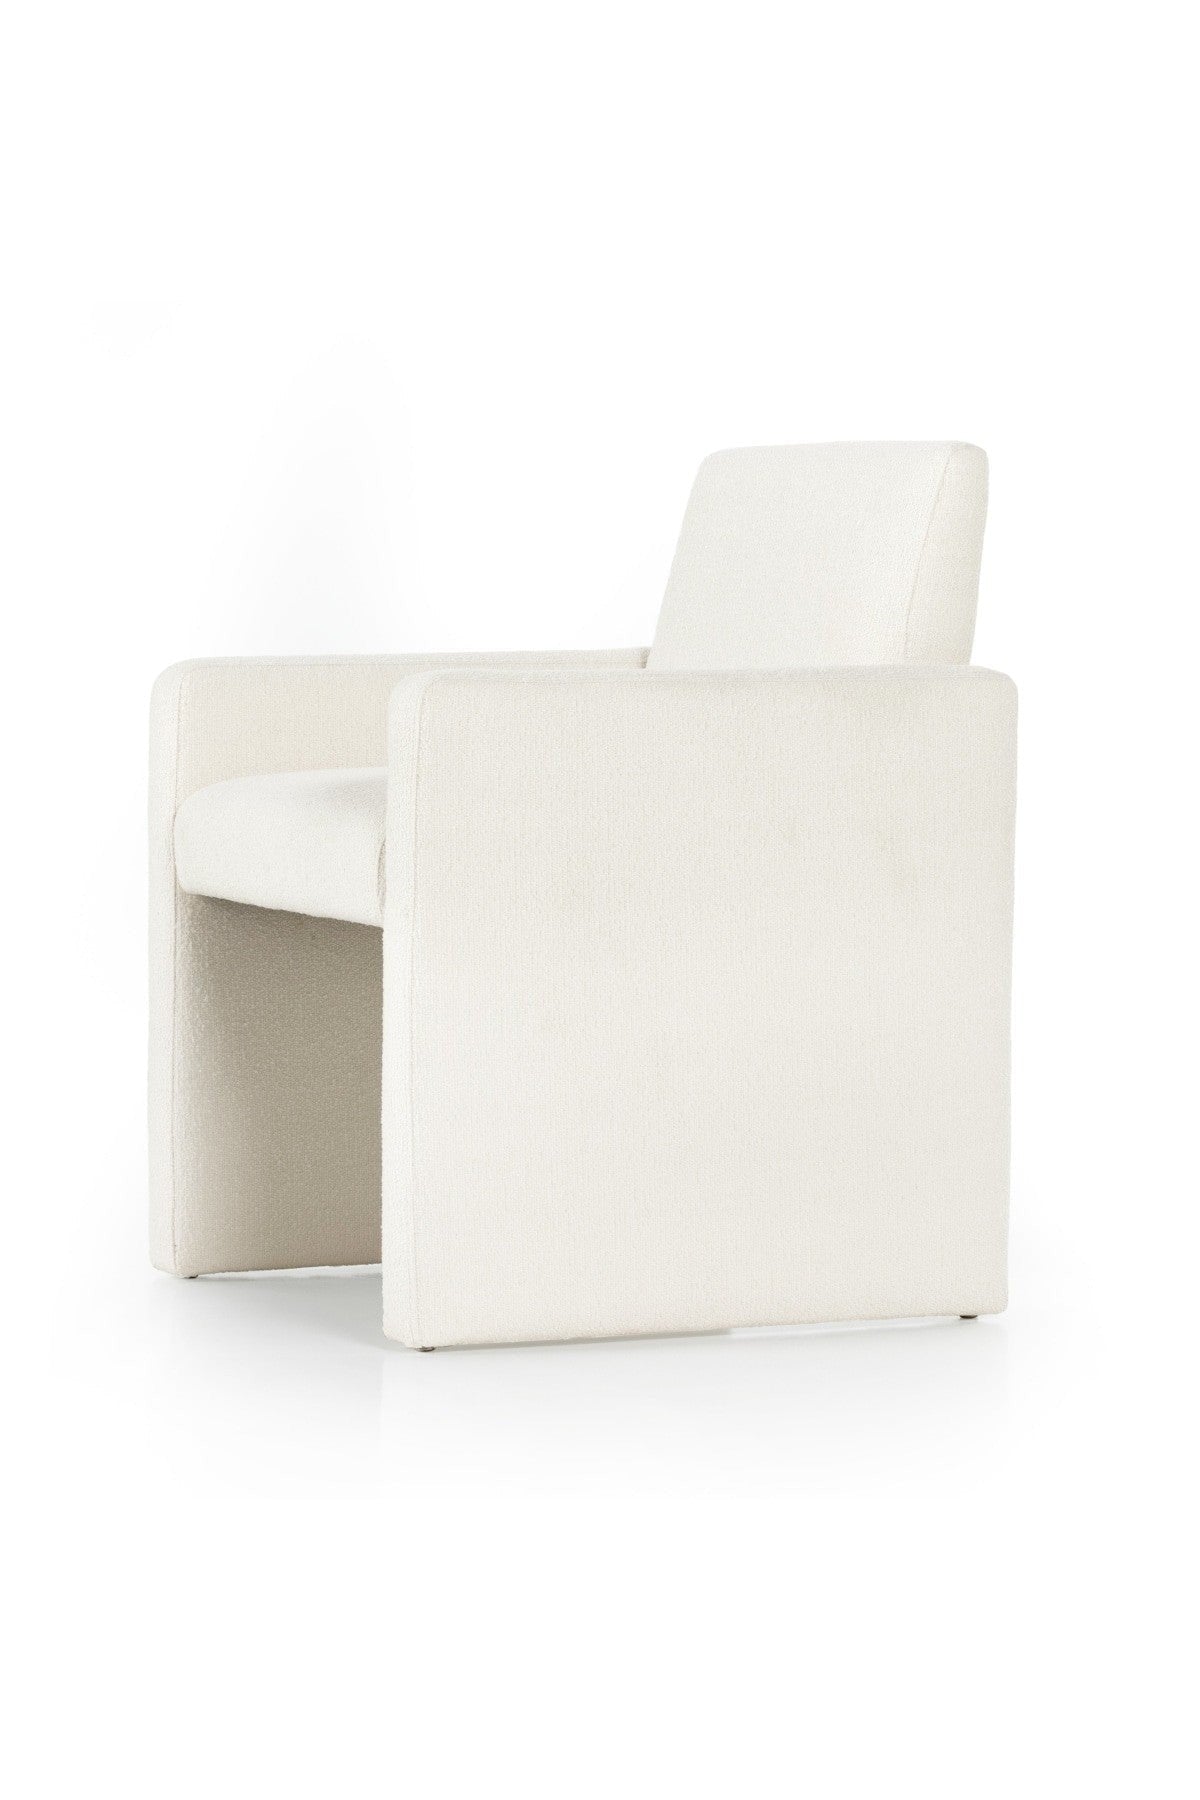 Manzo Dining Chair - Open Box